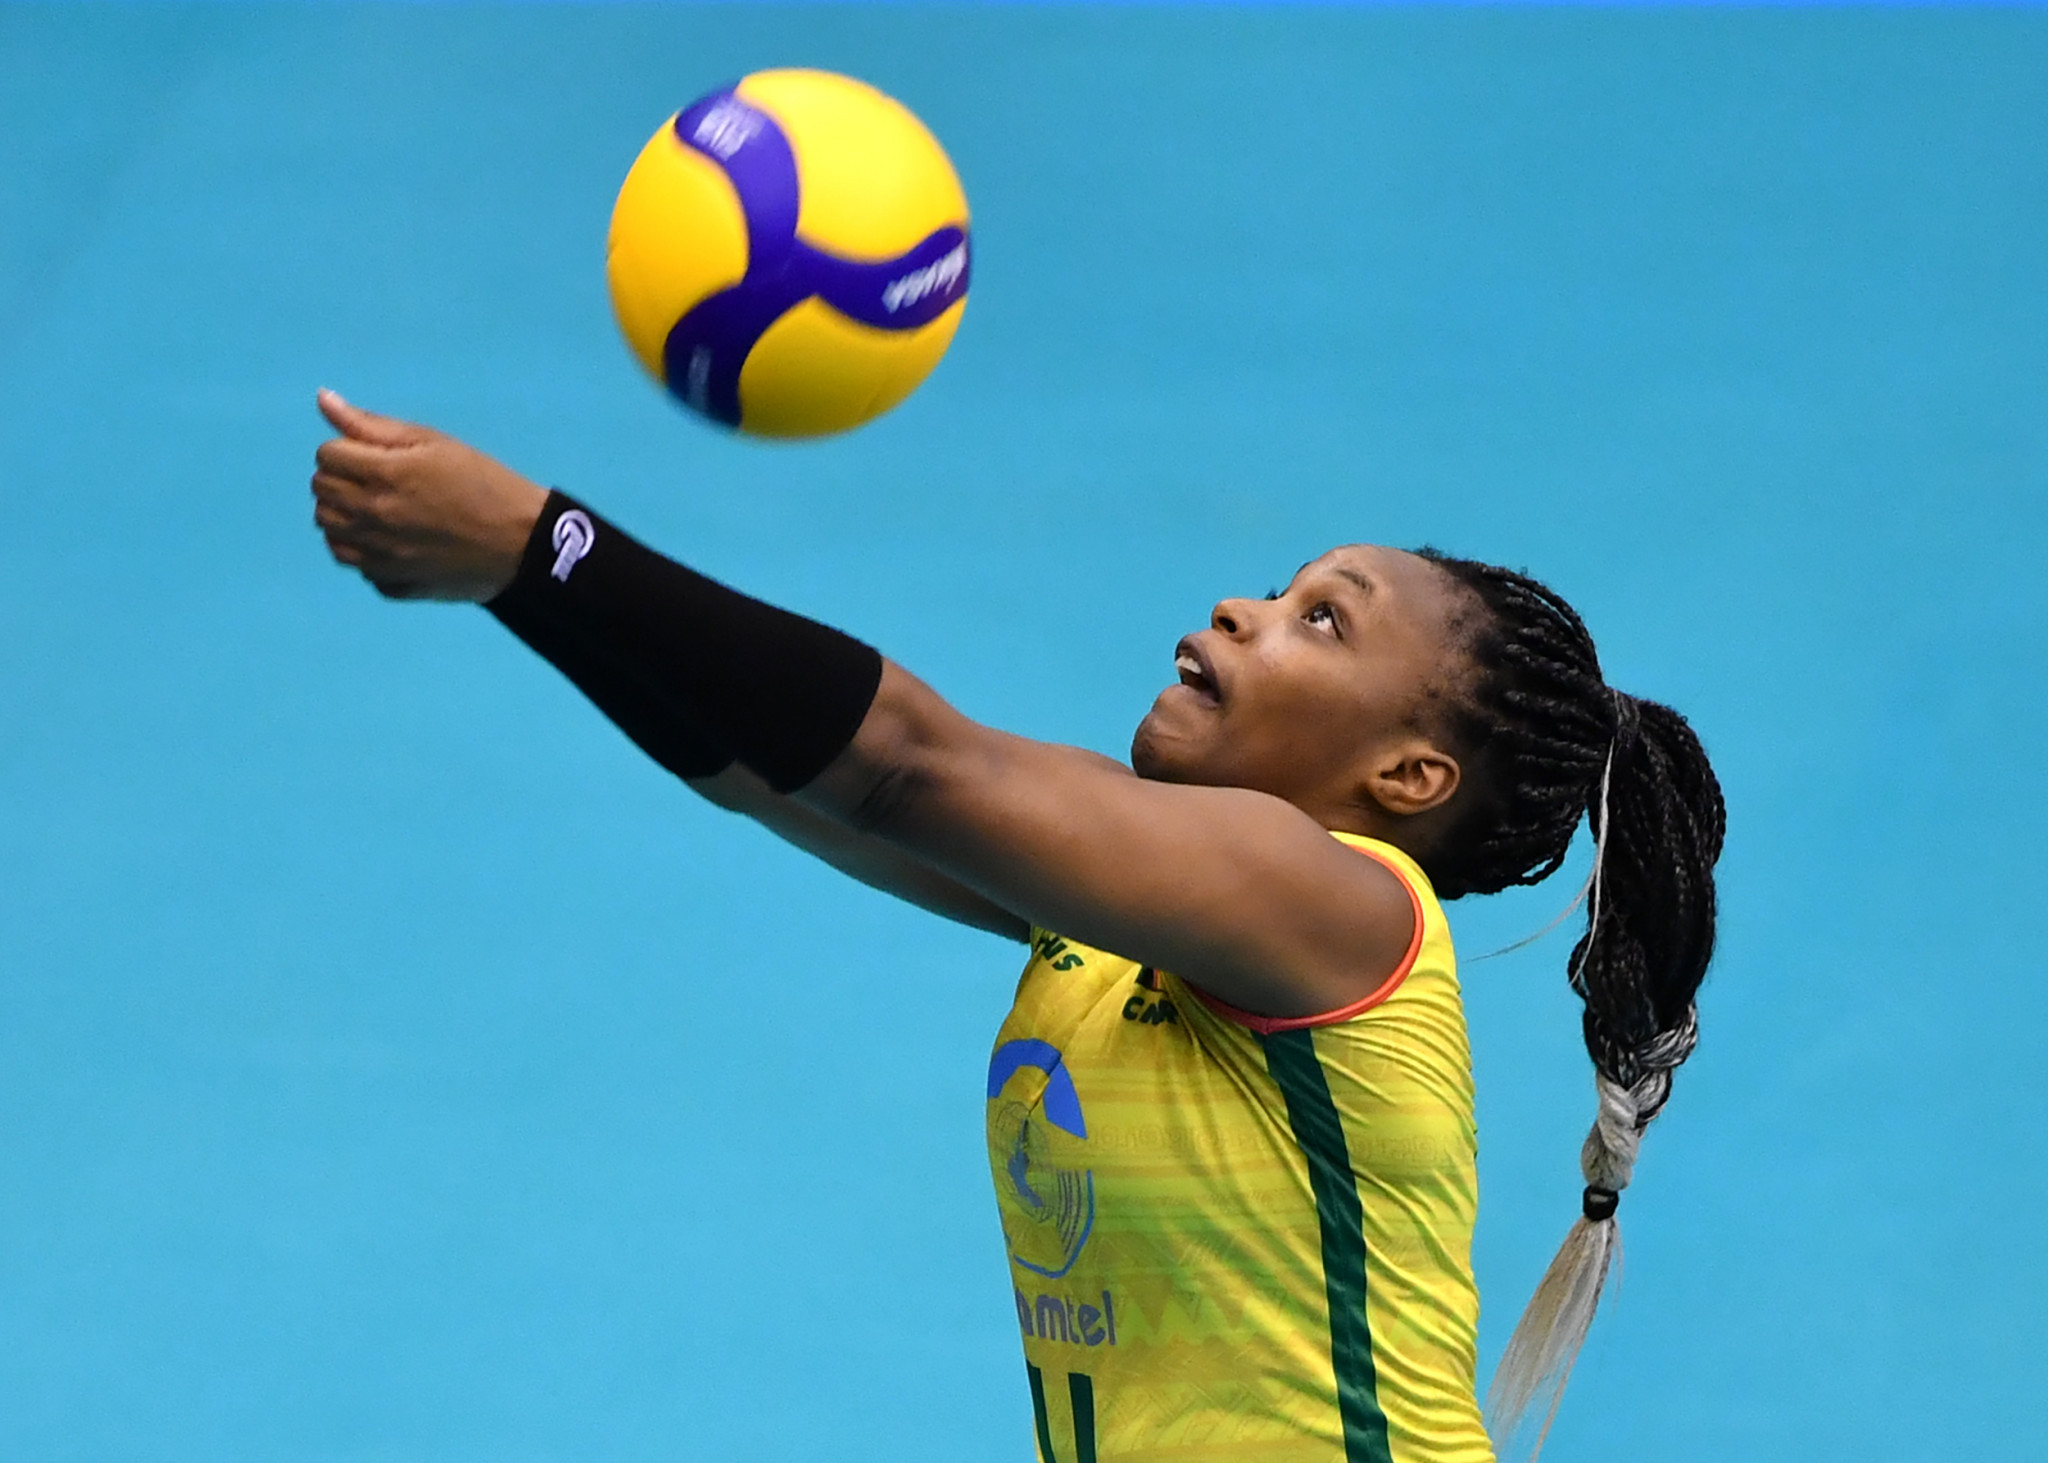 Olympics Volleyball Live Score Online